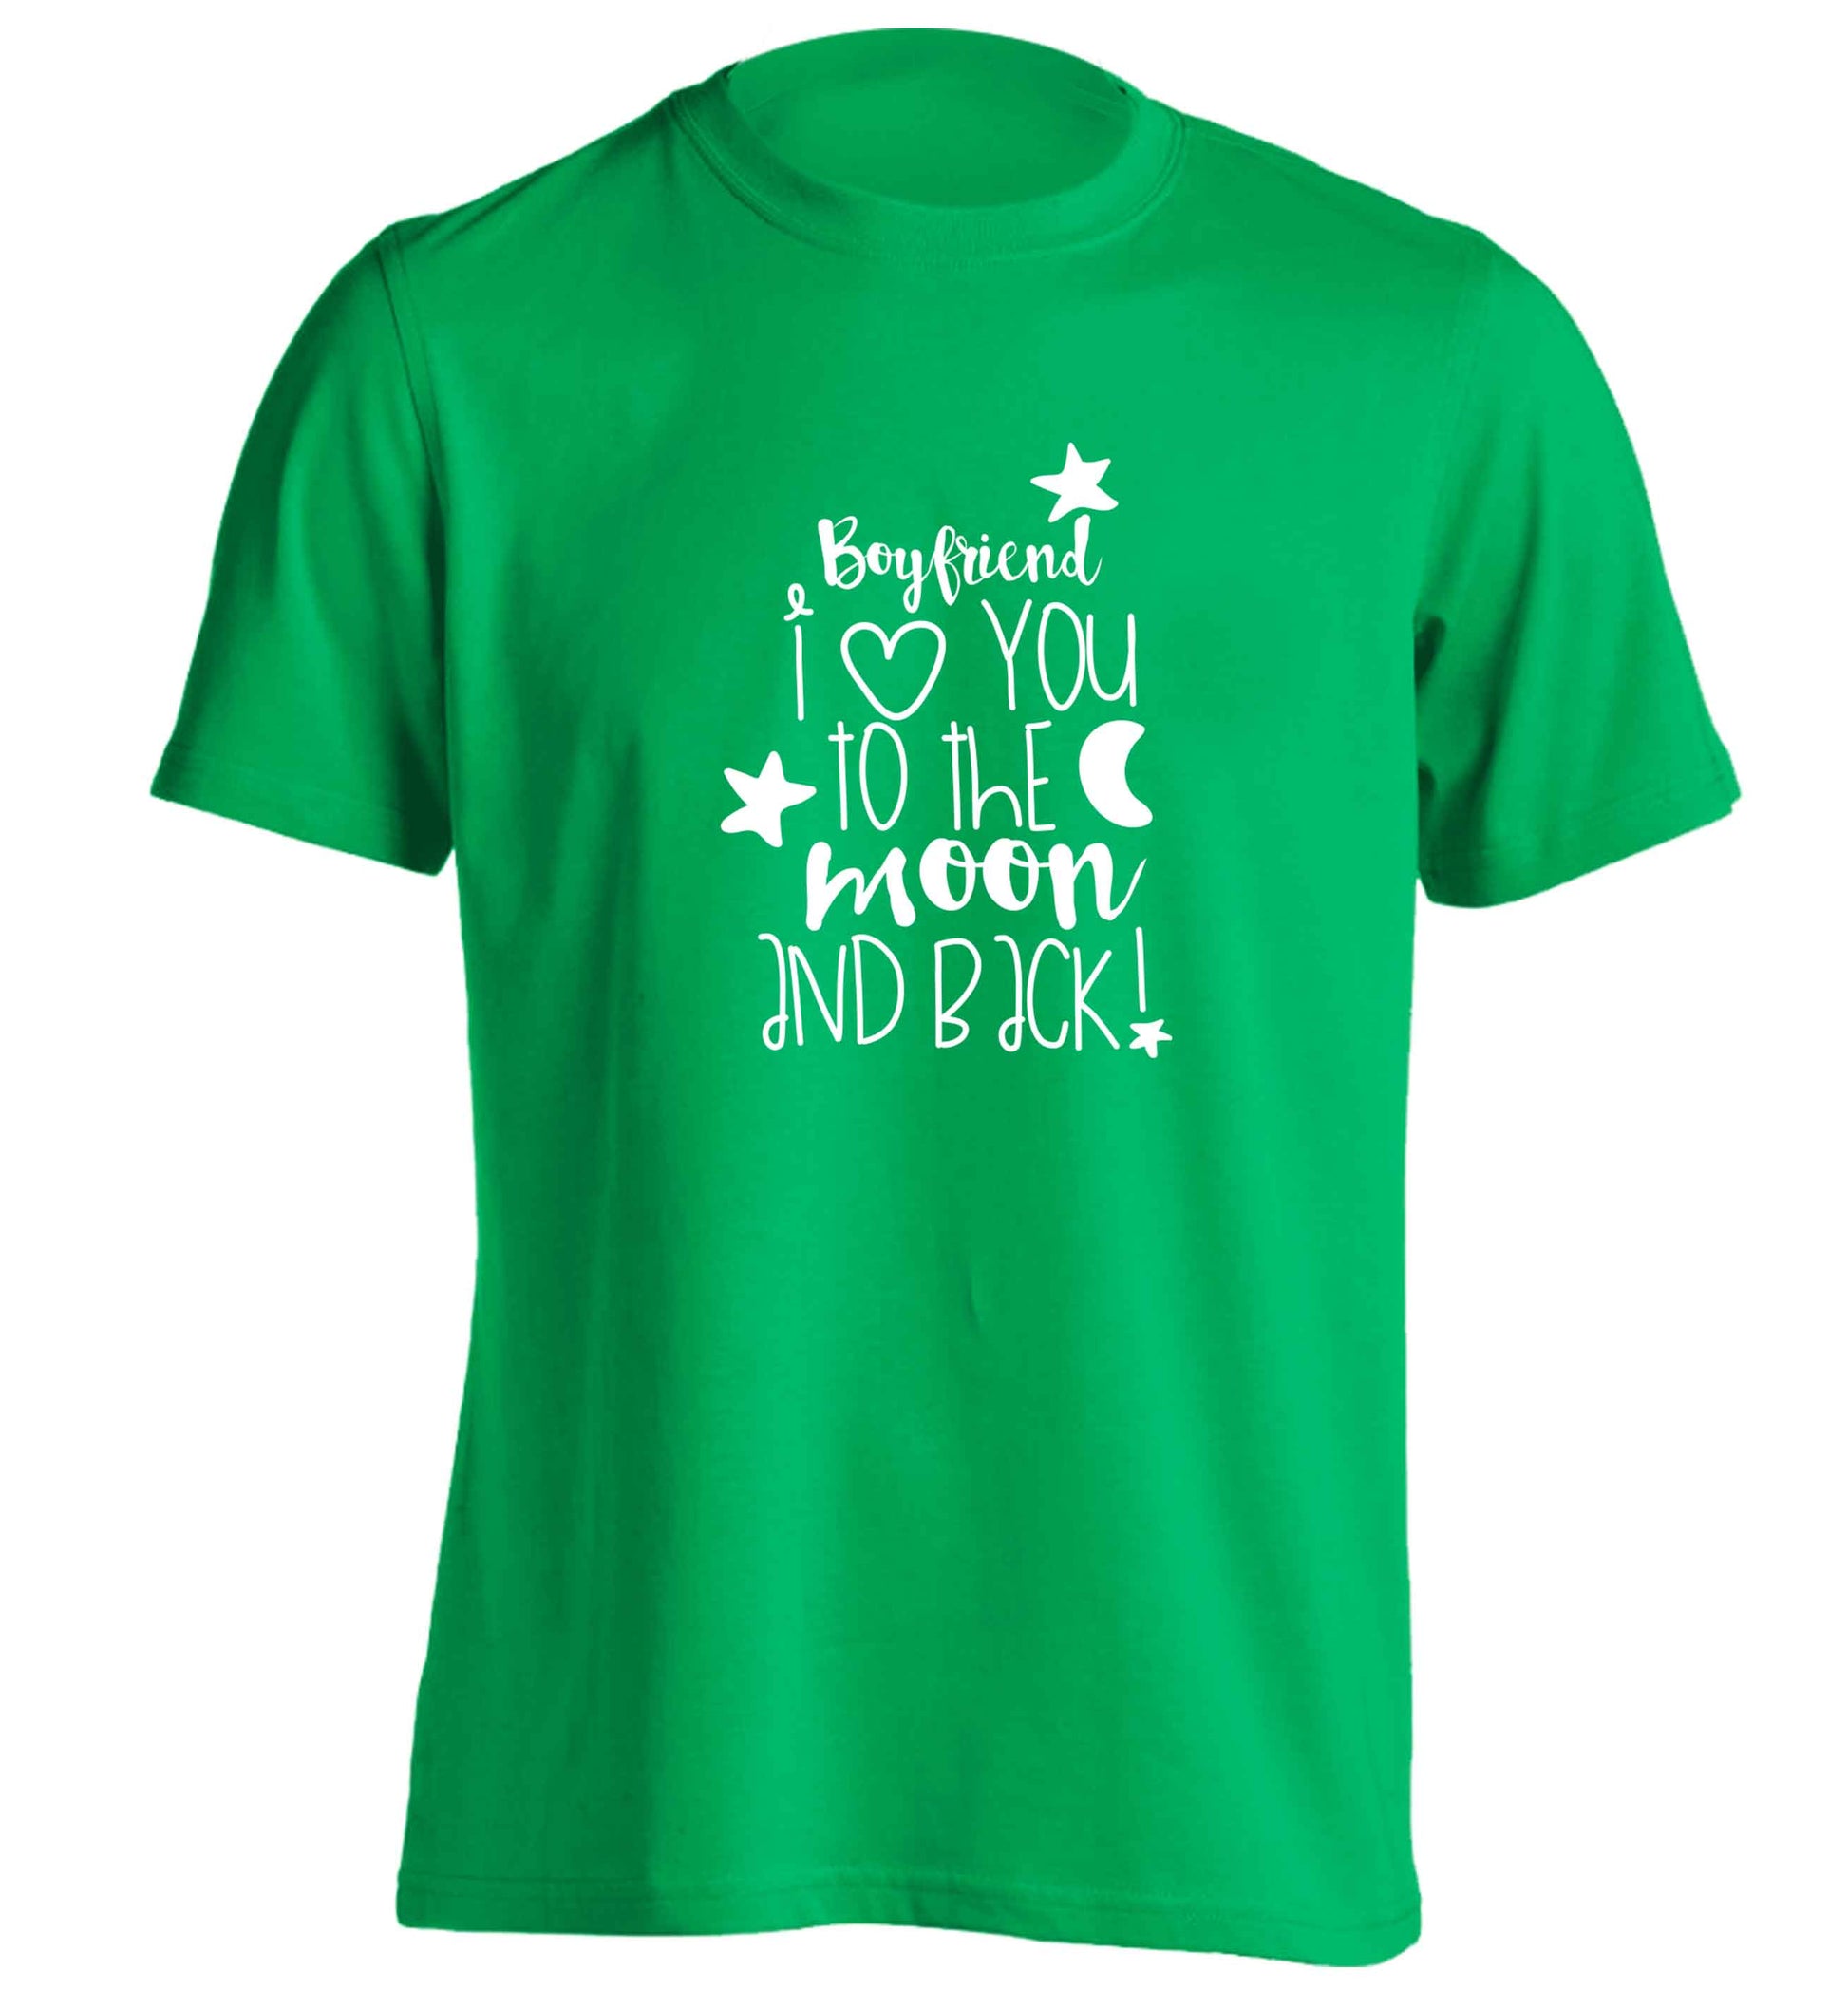 Boyfriend I love you to the moon and back adults unisex green Tshirt 2XL